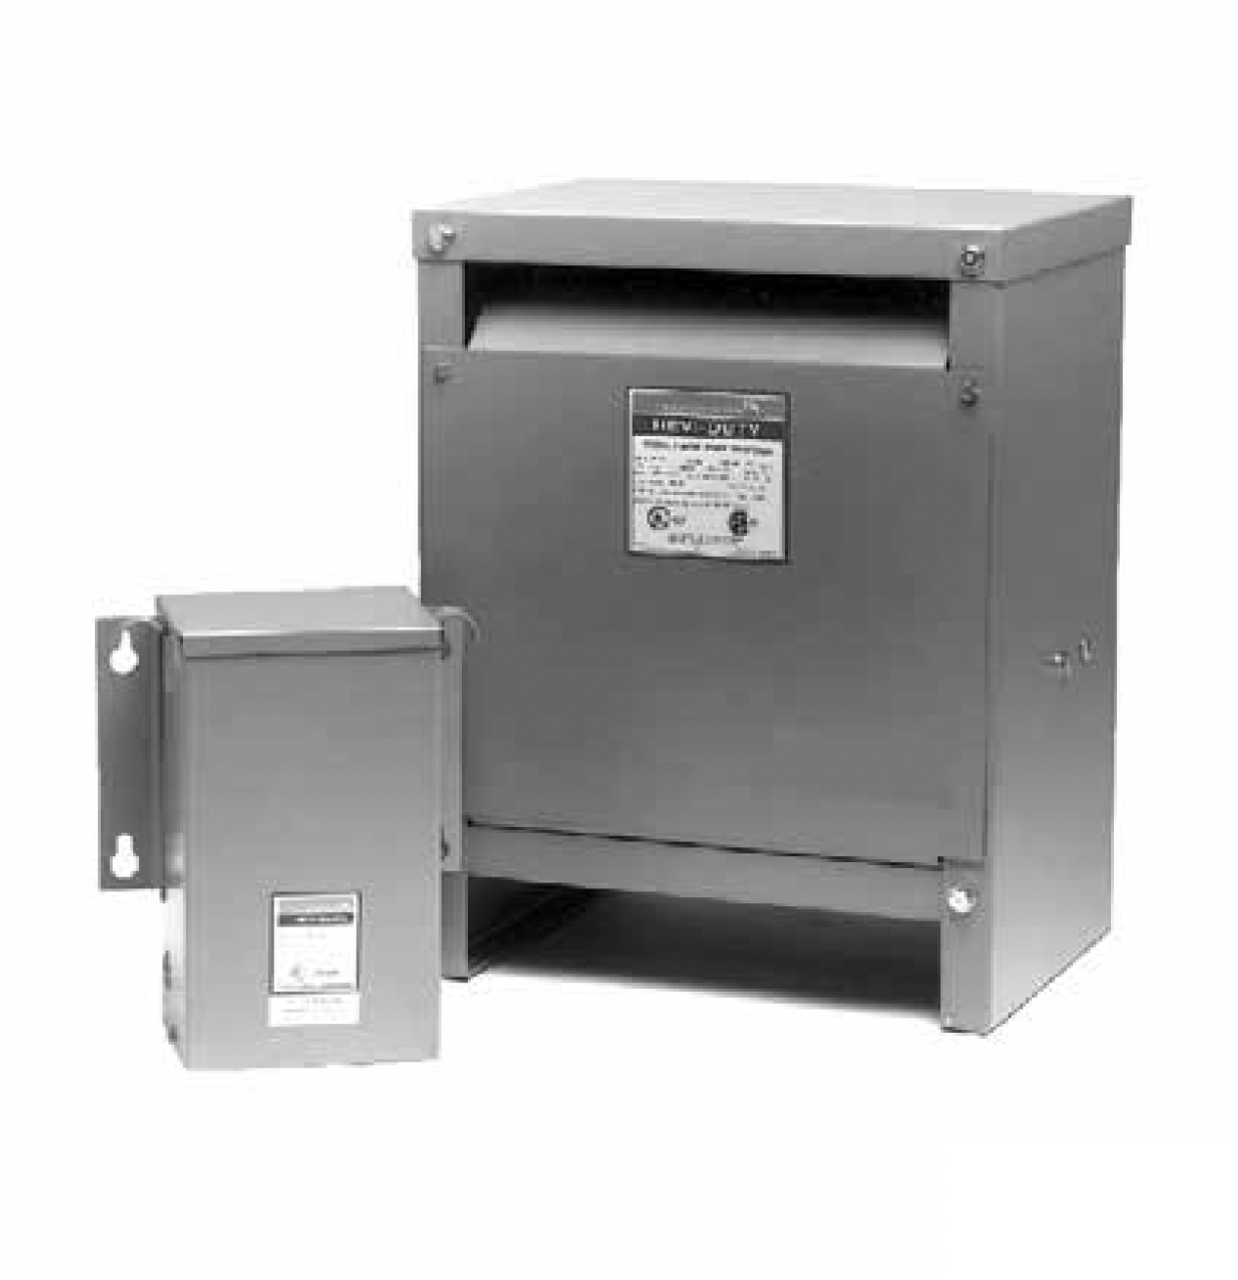 SolaHD Emerson - DT631H75S Dry-Type Distribution Transformers